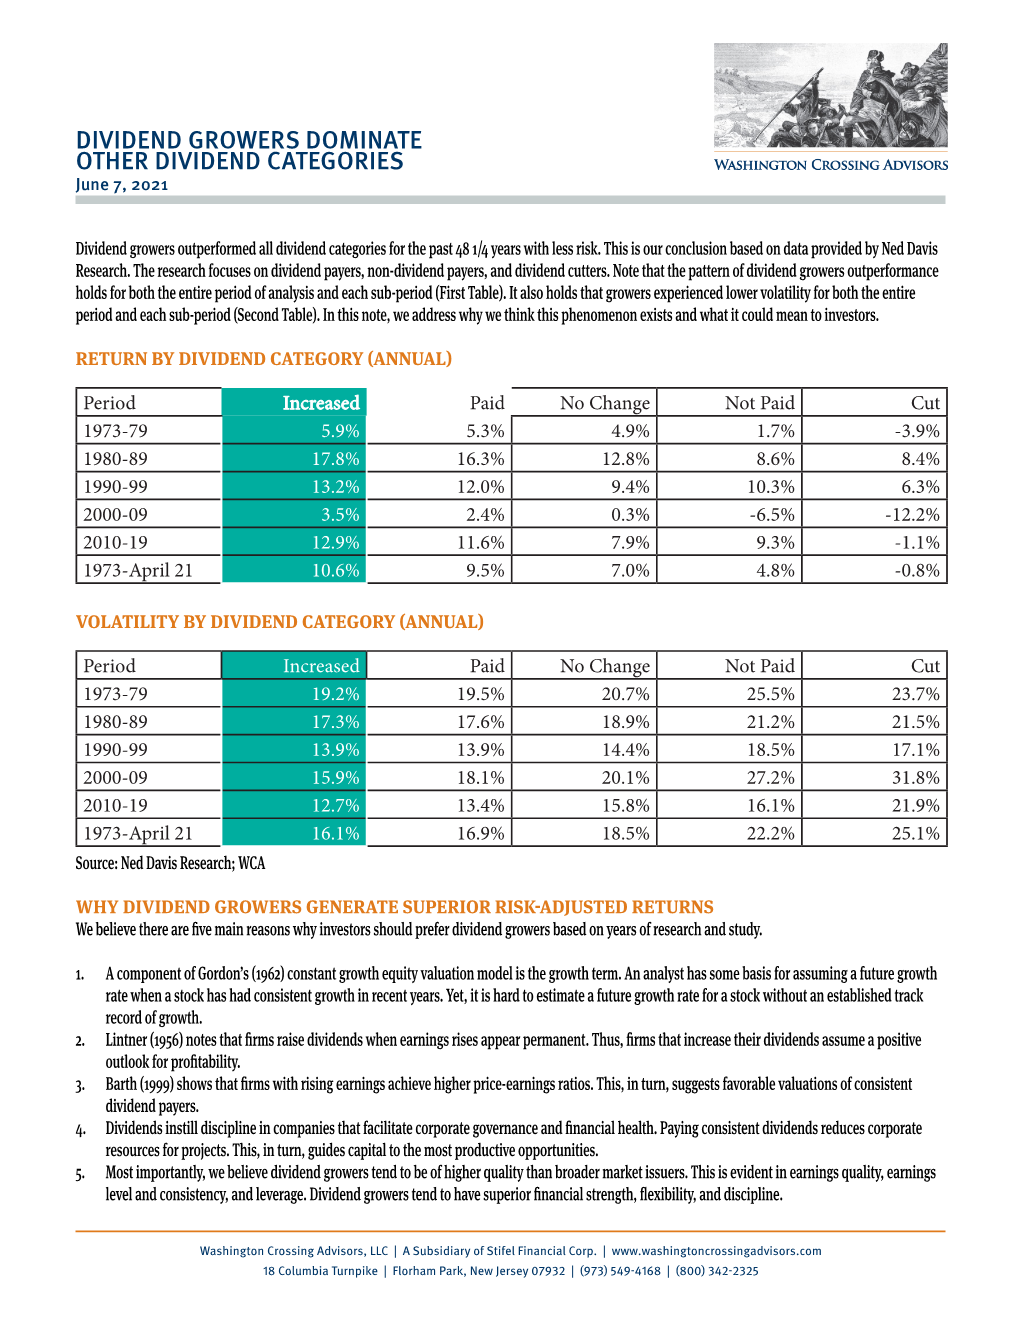 DIVIDEND GROWERS DOMINATE OTHER DIVIDEND CATEGORIES June 7, 2021